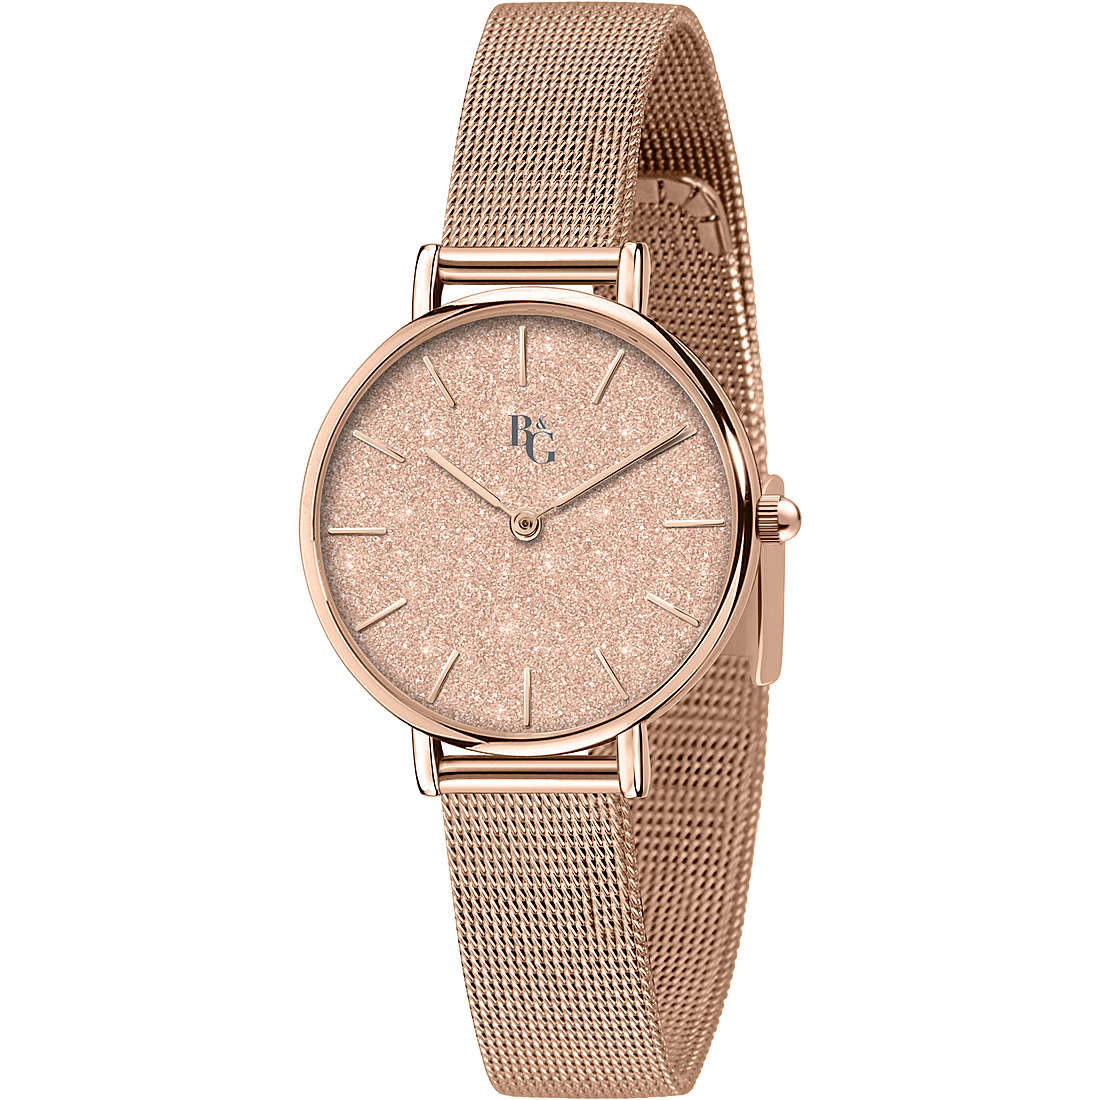 only time watch Metal Pink dial woman Preppy R3853252530